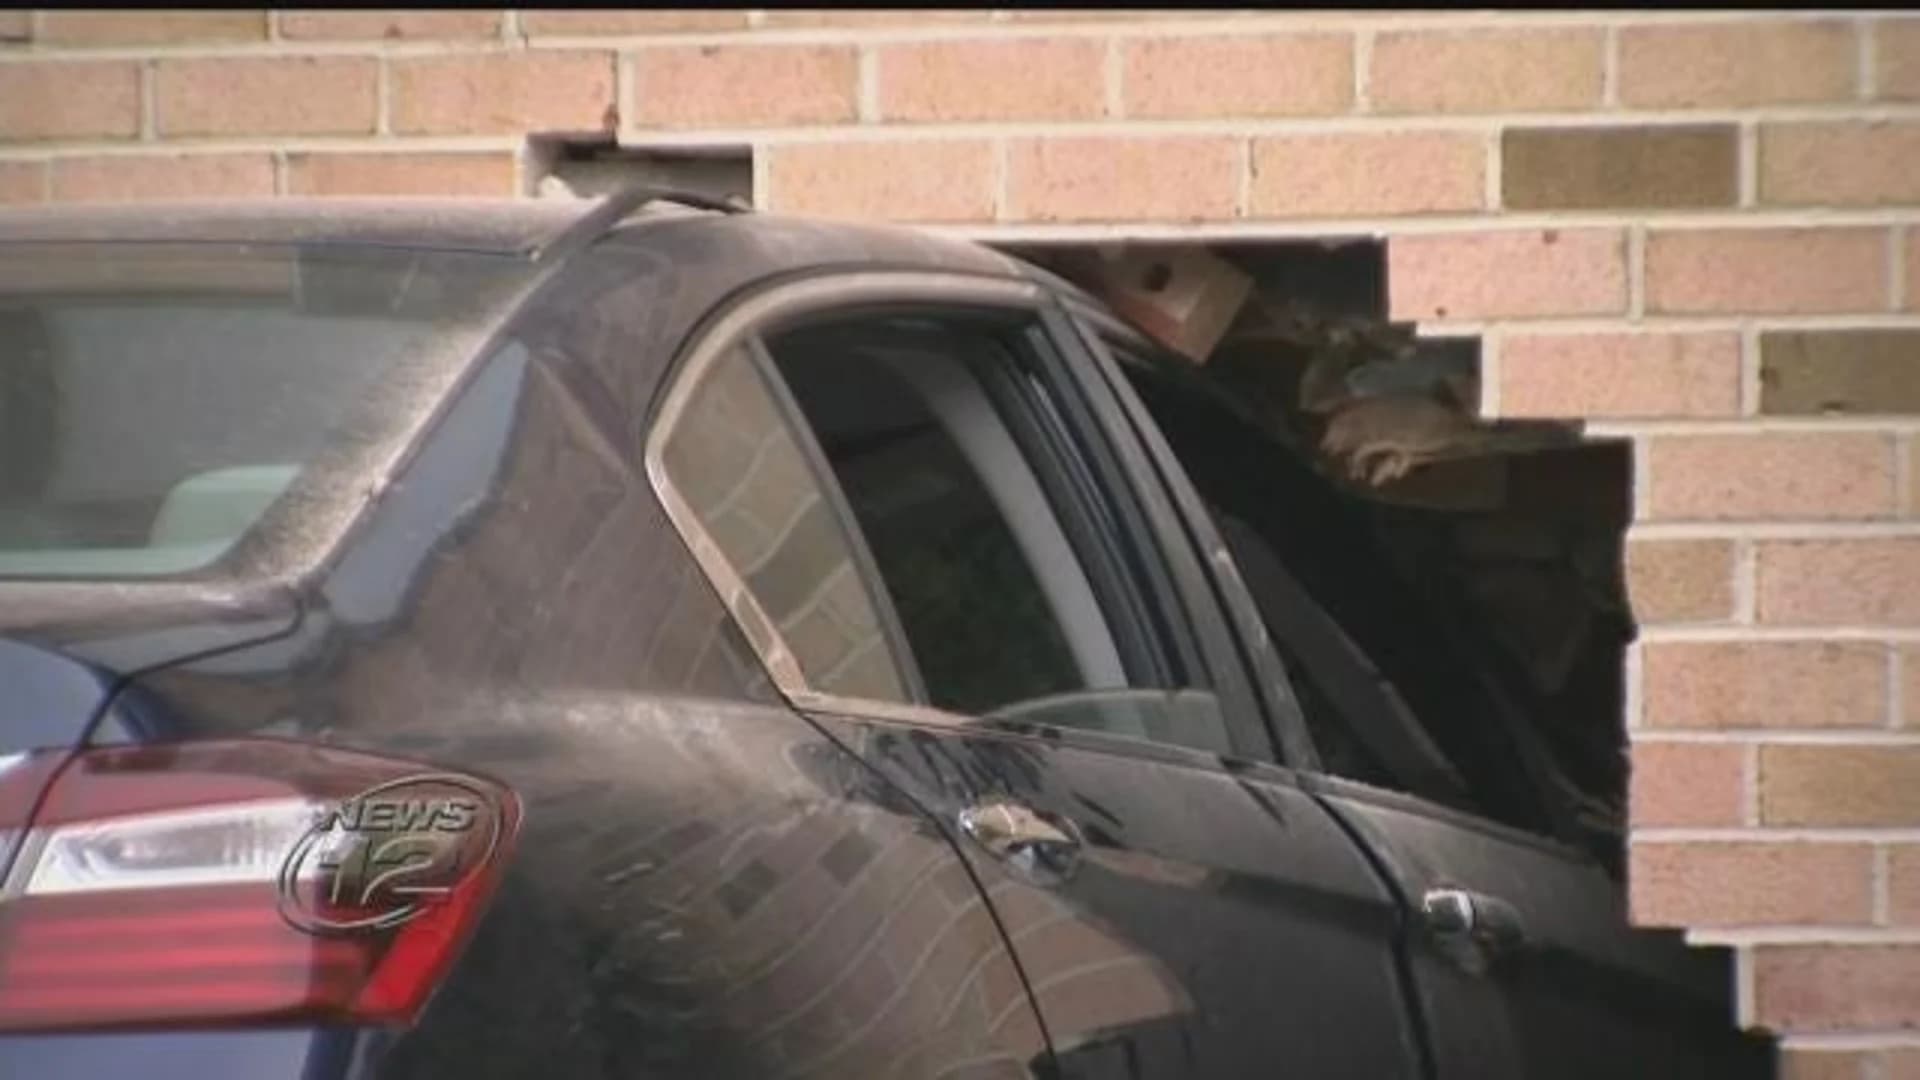 Couple taken to hospital after car rams into building